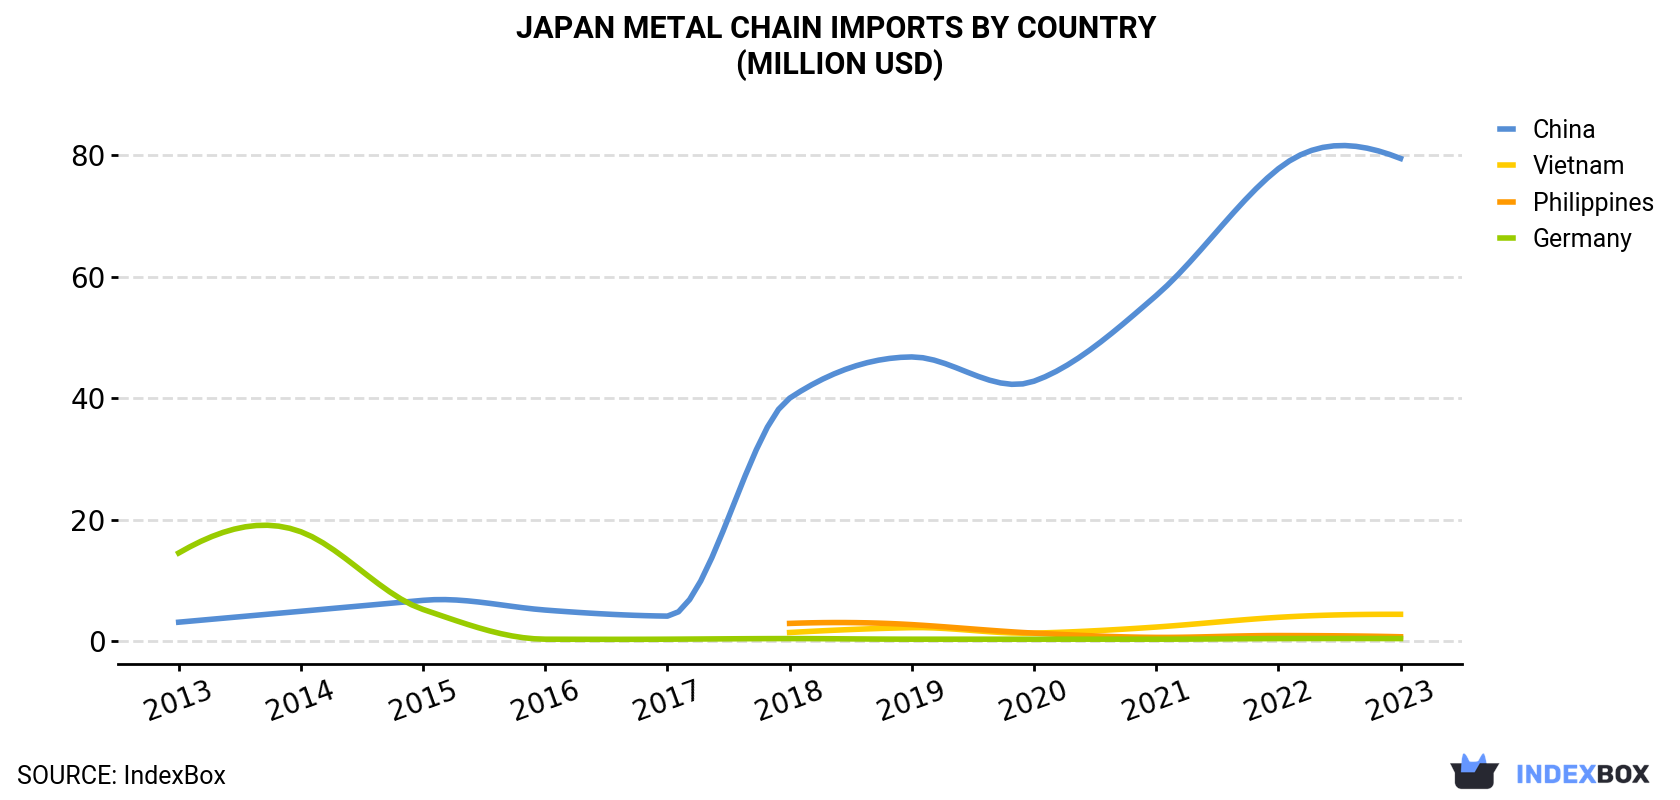 Japan Metal Chain Imports By Country (Million USD)